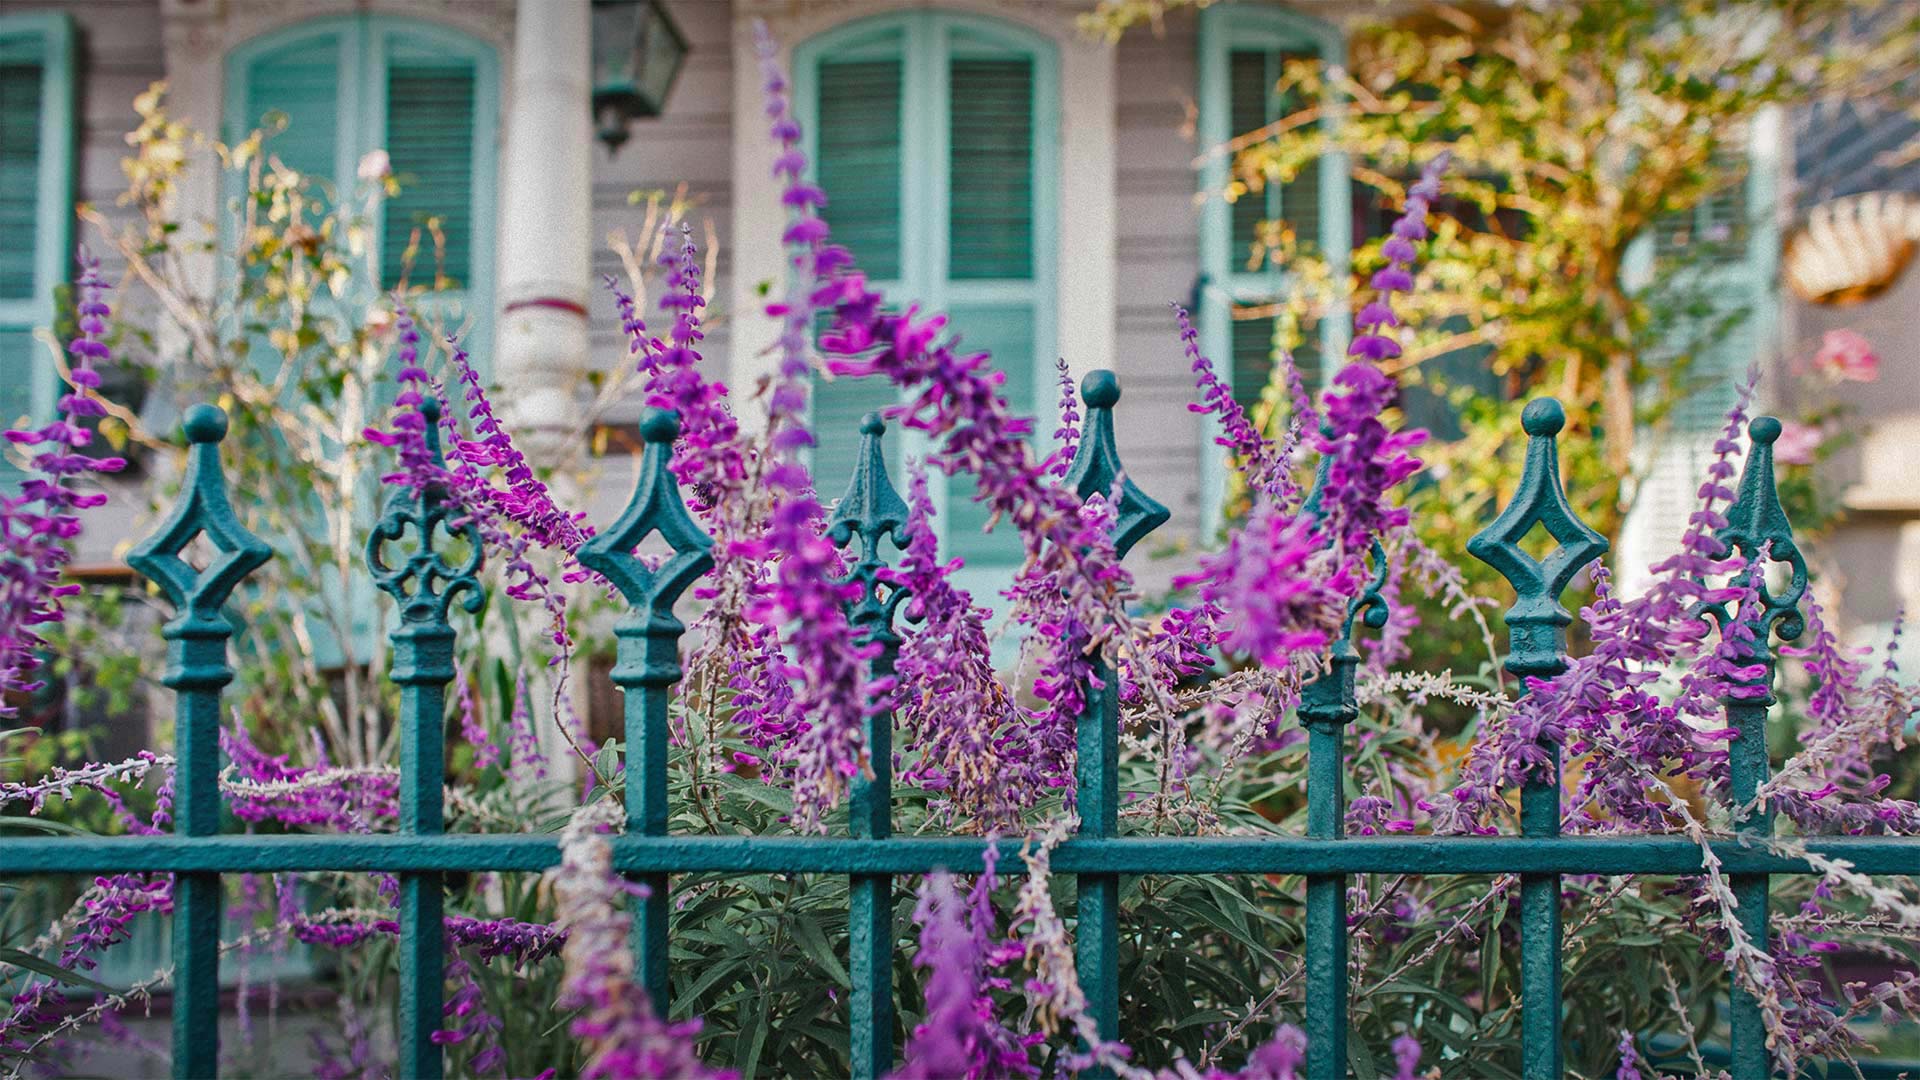 Flowers and an ironwork fence in front of a house in New Orleans, Louisiana - Lauren Mitchell/Offset by Shutterstock)